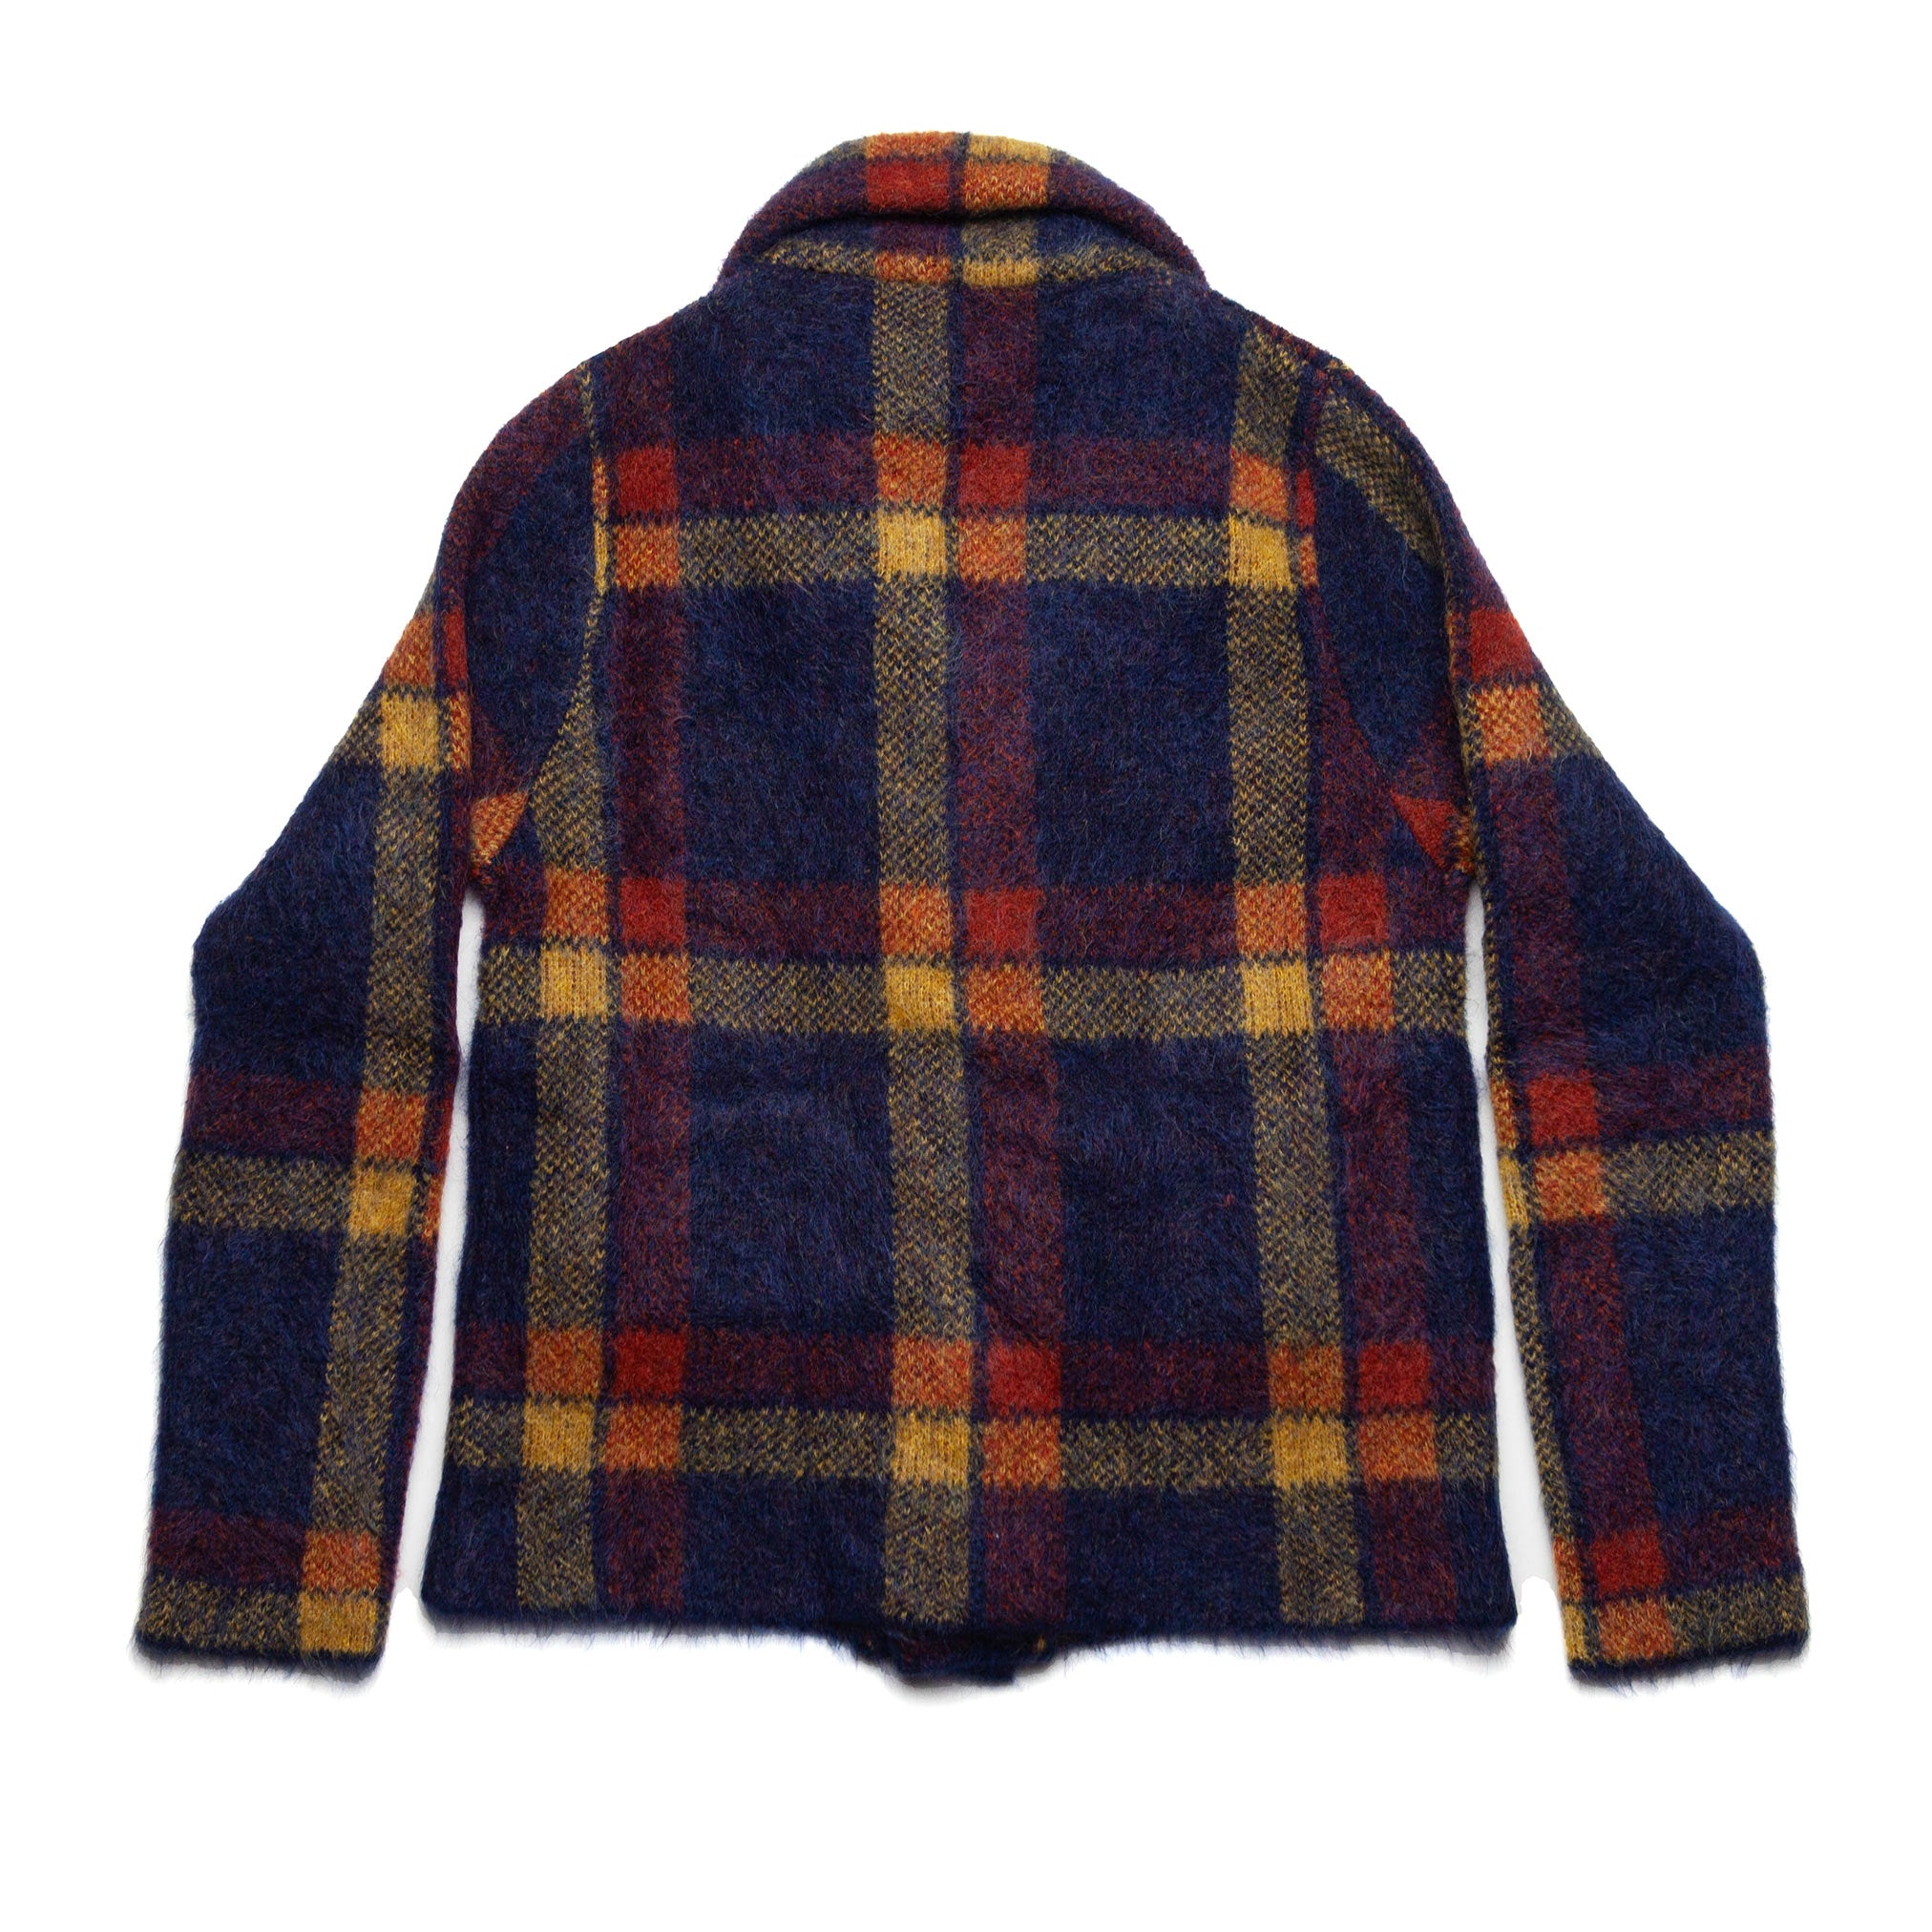 Mohair Jacket in Blue Plaid